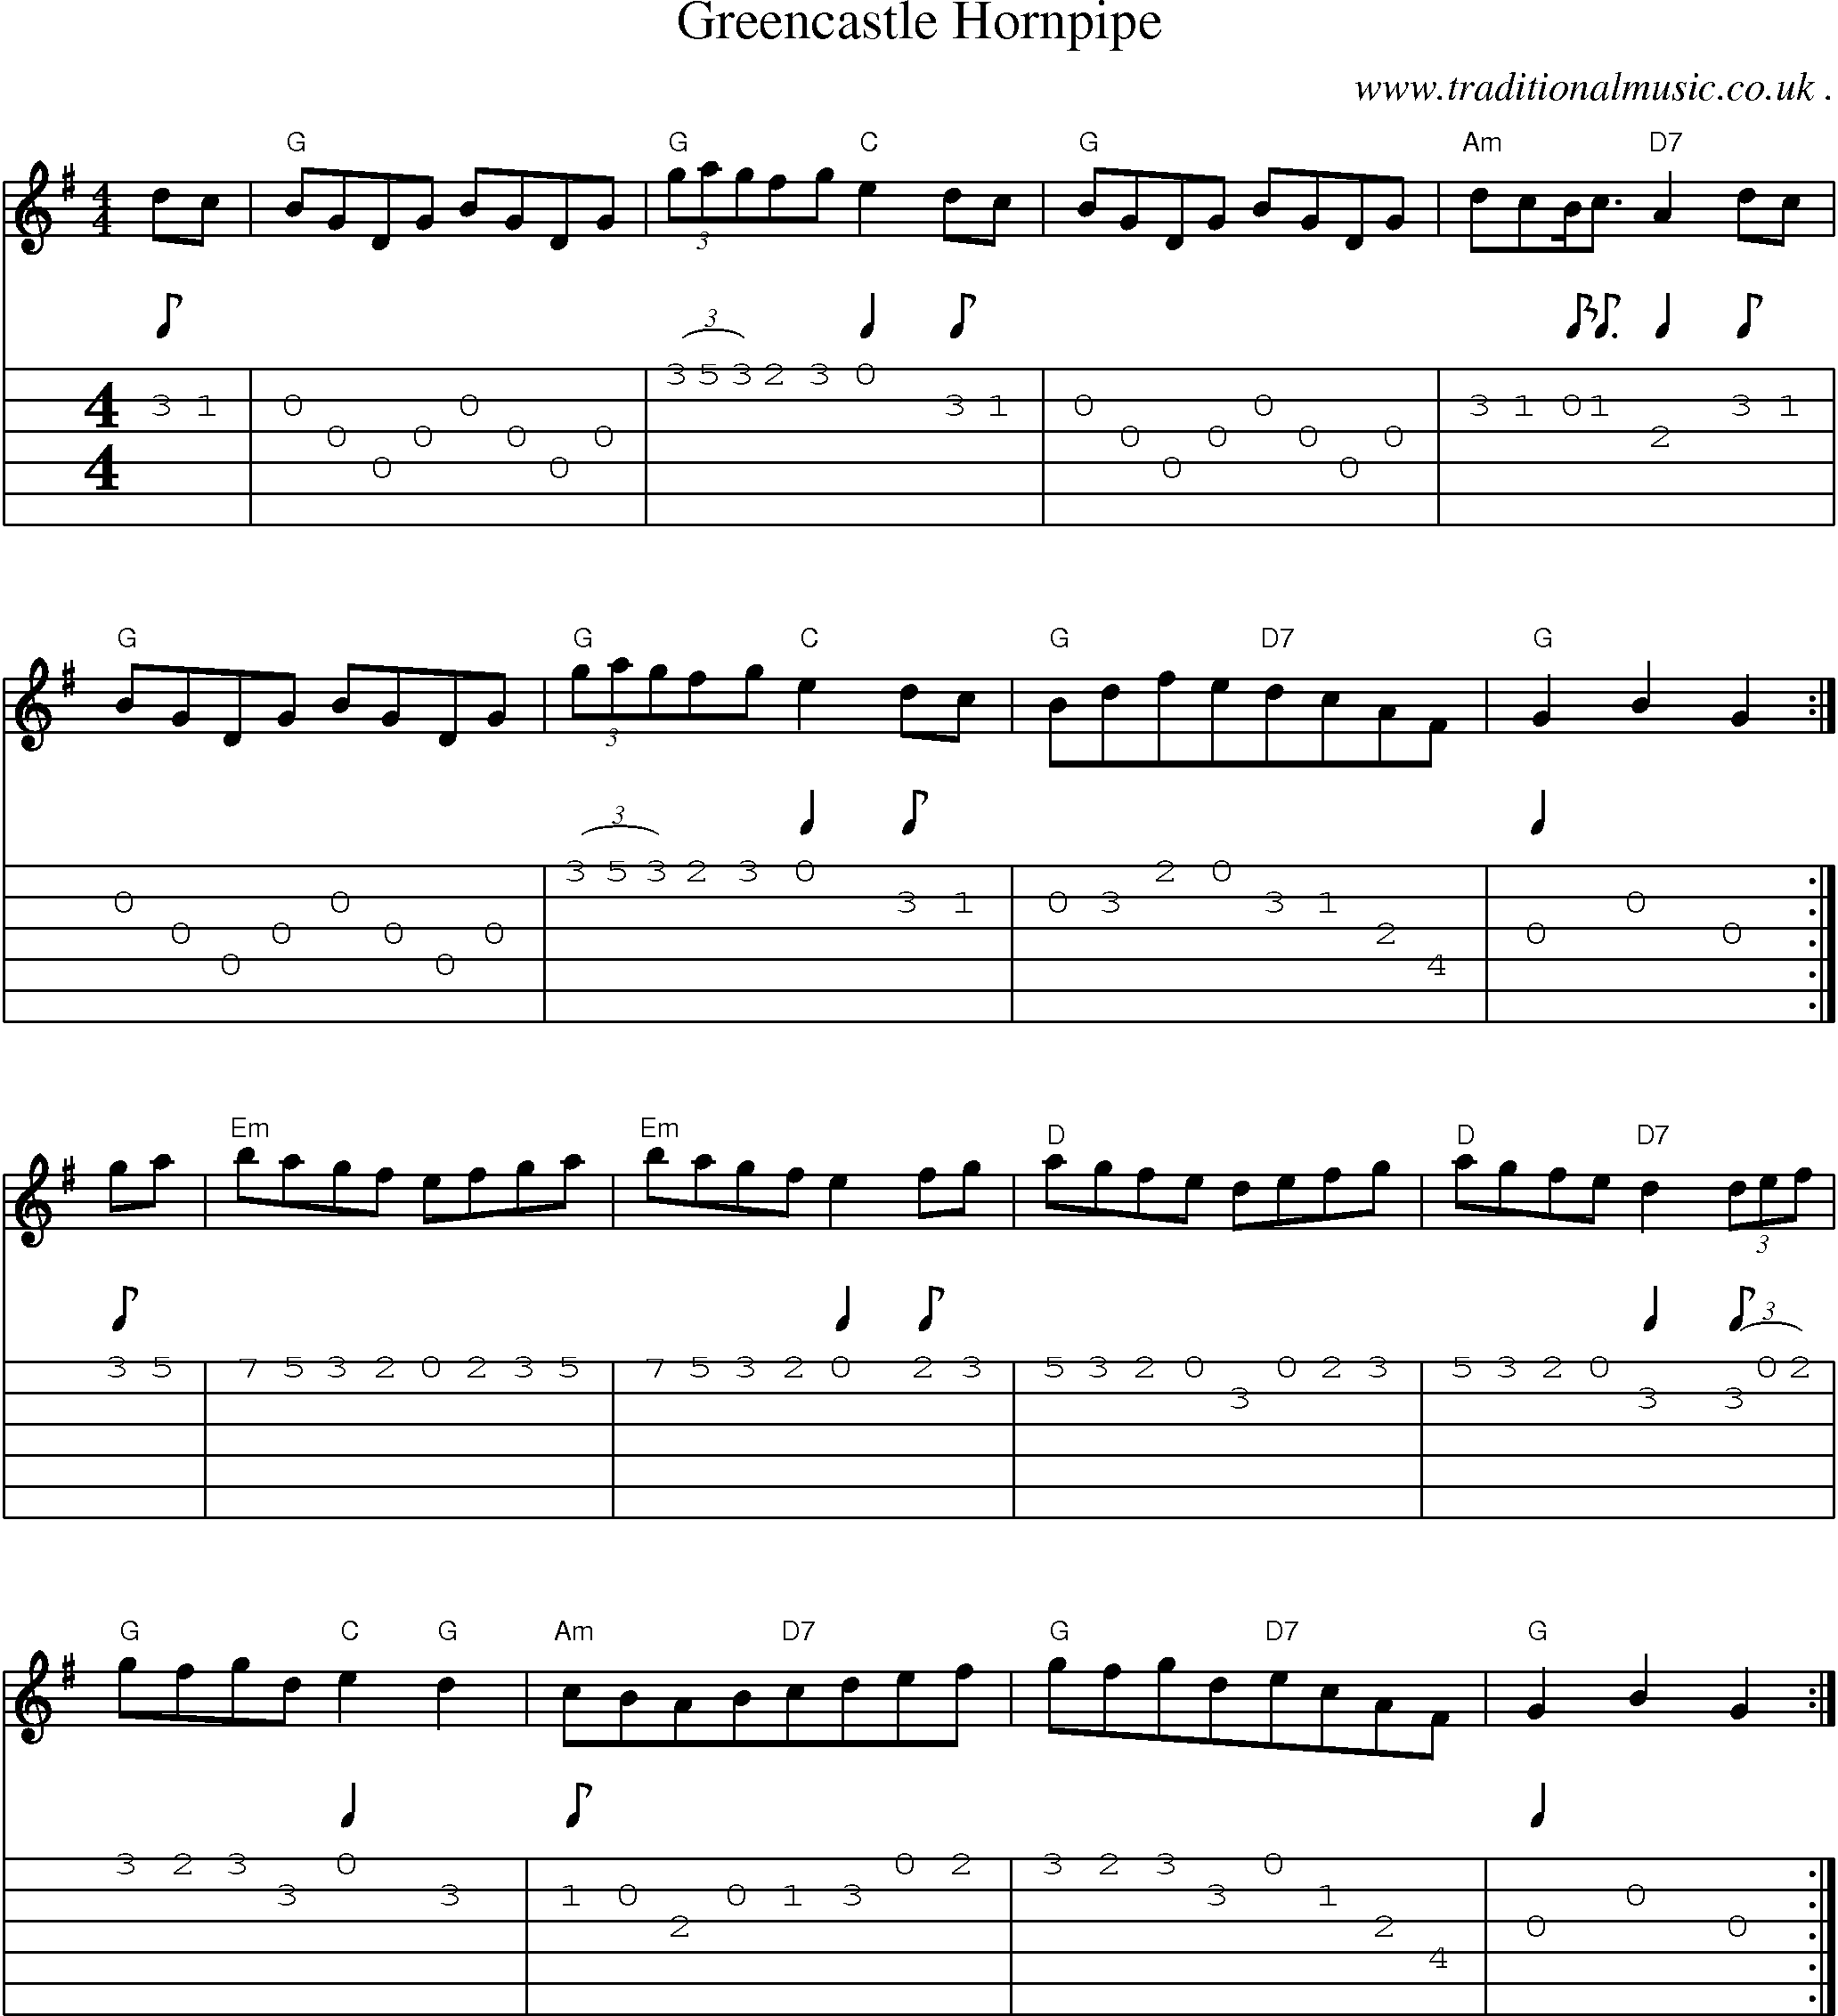 Sheet-Music and Guitar Tabs for Greencastle Hornpipe